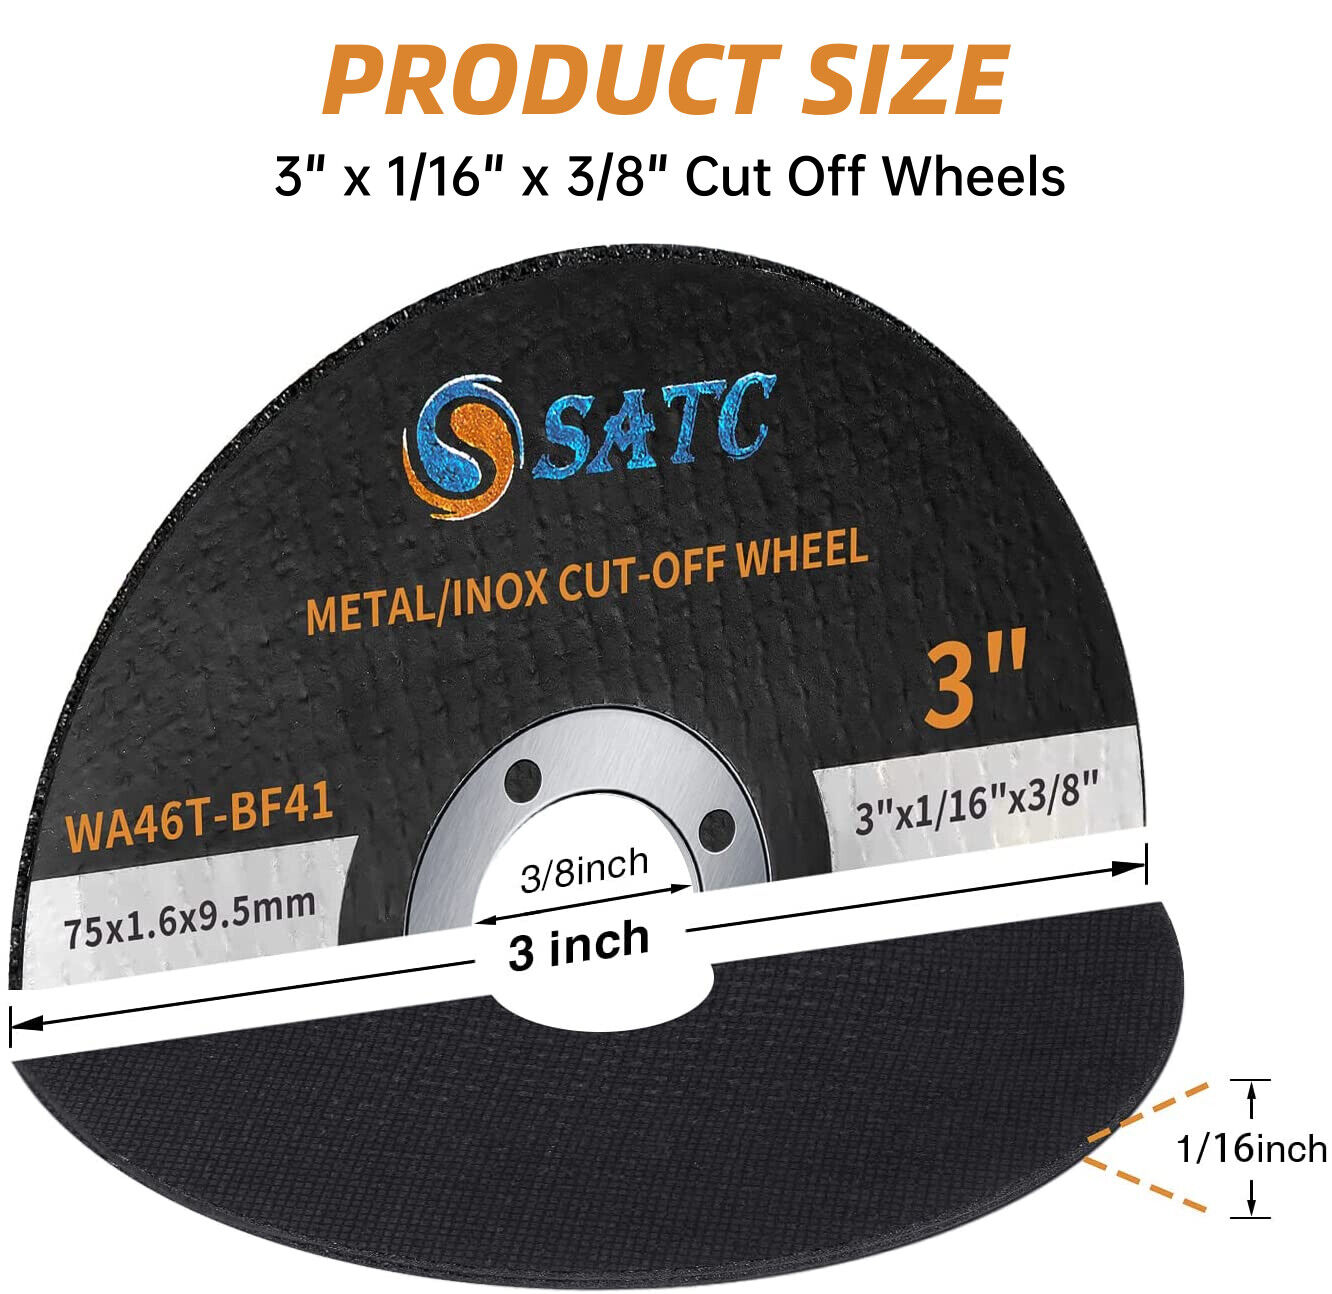 50 Pack 3 in Cut Off Wheels with 3/8" Arbor Metal Cutting Disc Die Grinder Tool Satc Does Not Apply - фотография #2